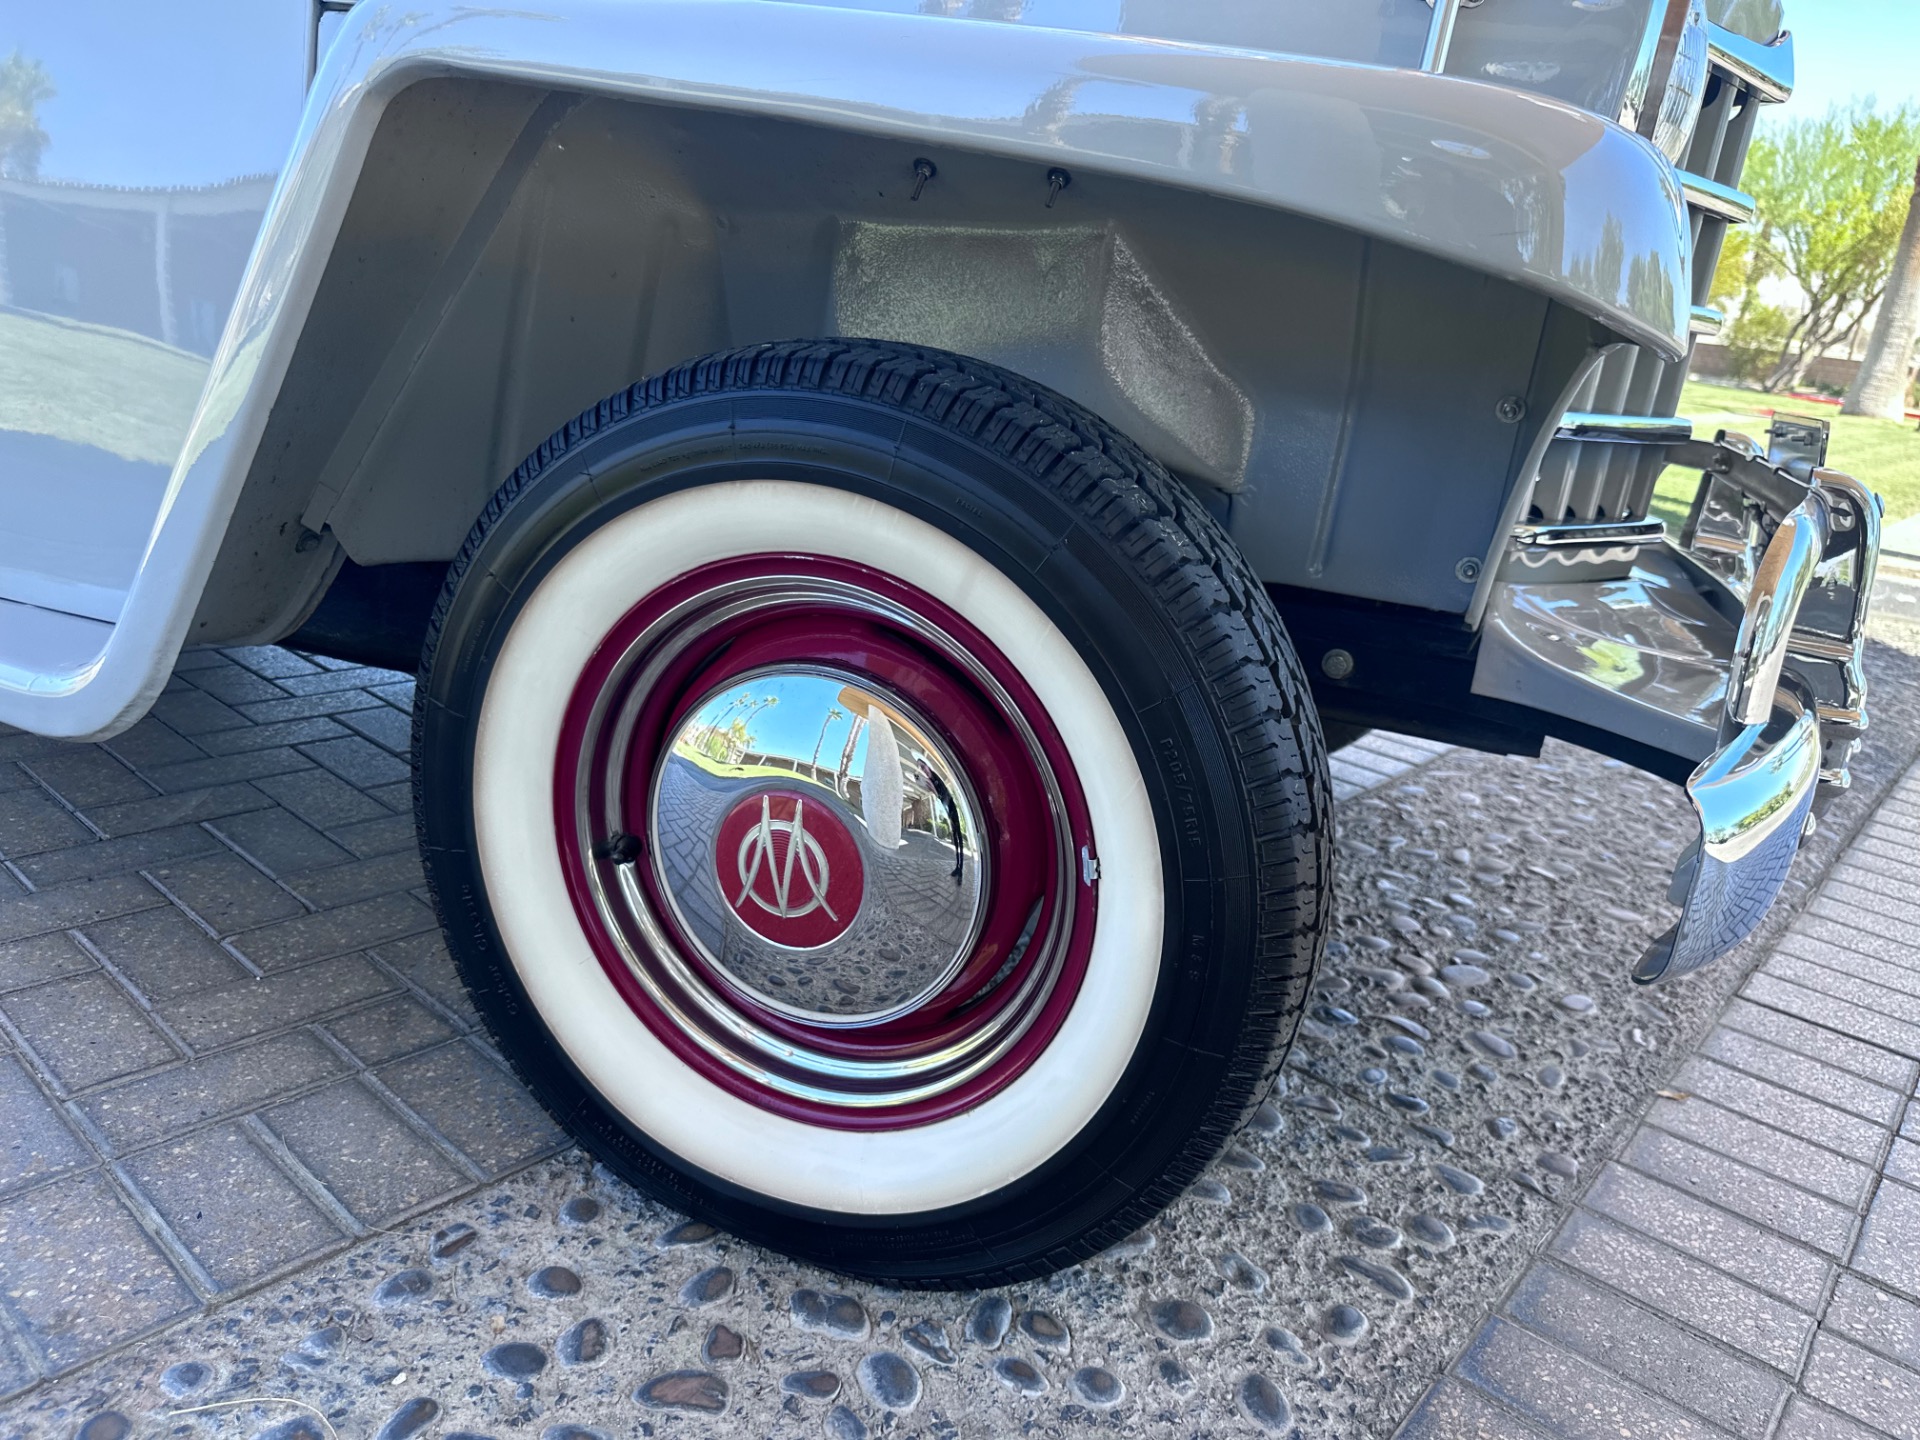 Used-1950-willys-Jeepster